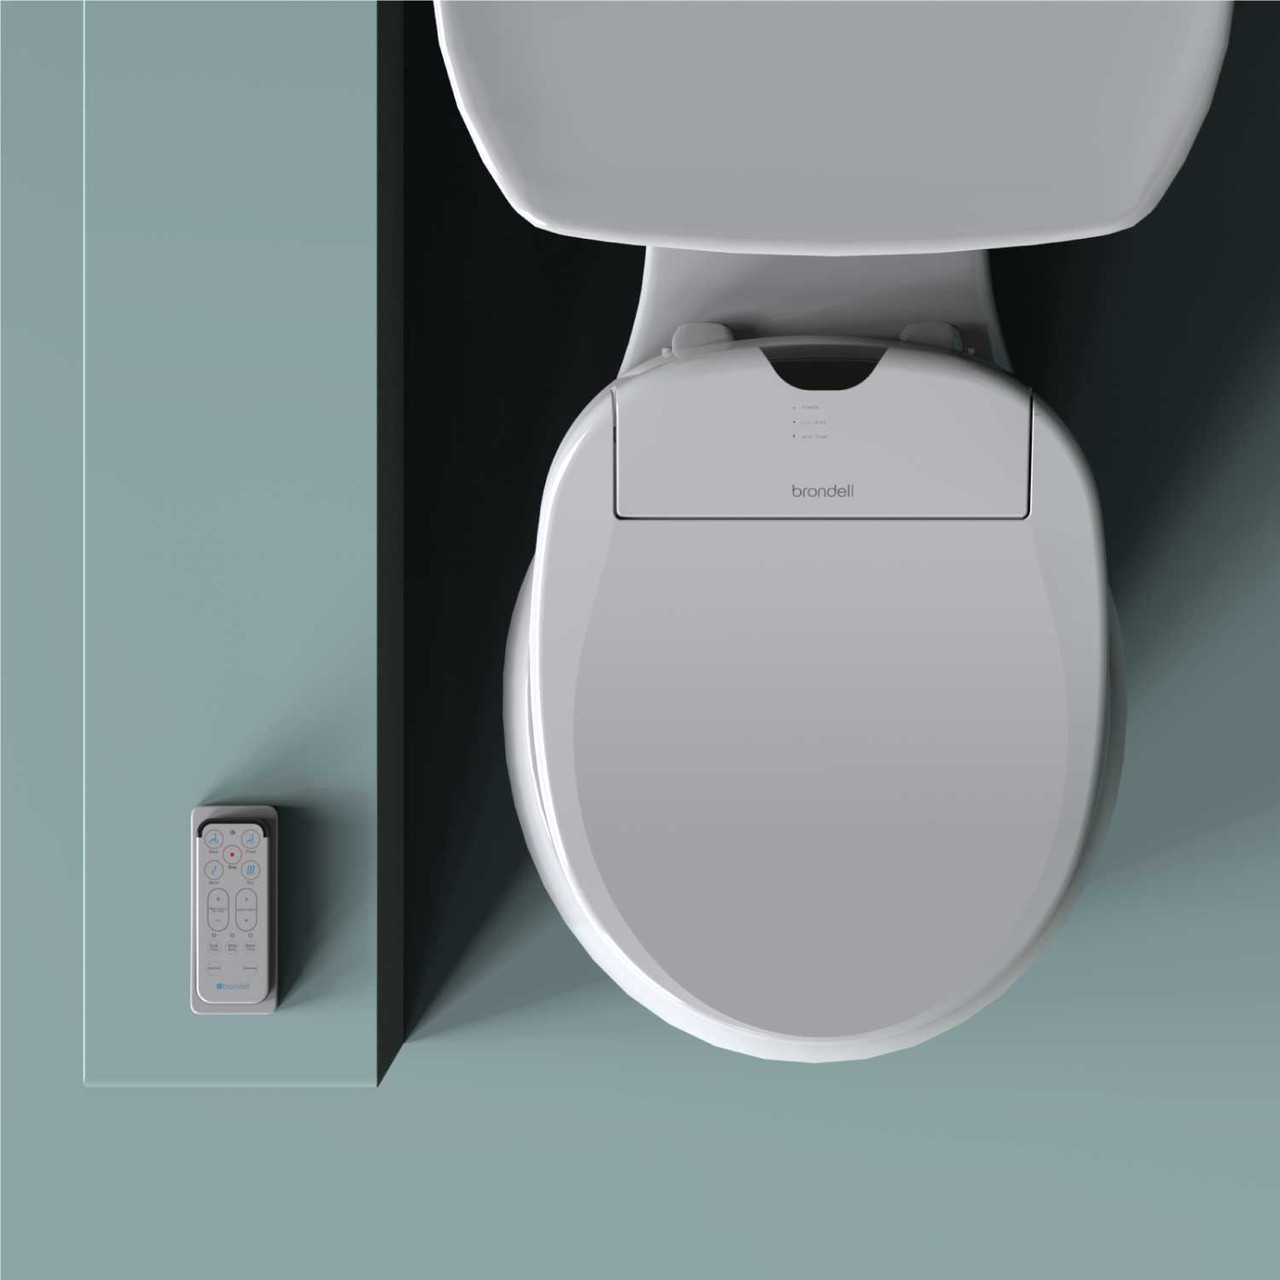 https://cdn11.bigcommerce.com/s-mpfo2gcqca/images/stencil/1280x1280/products/347/1753/brondell-swash-1000-s1000-advanced-bidet-toilet-seat-installed-remote-control-sage-background__08053.1646250430.jpg?c=1